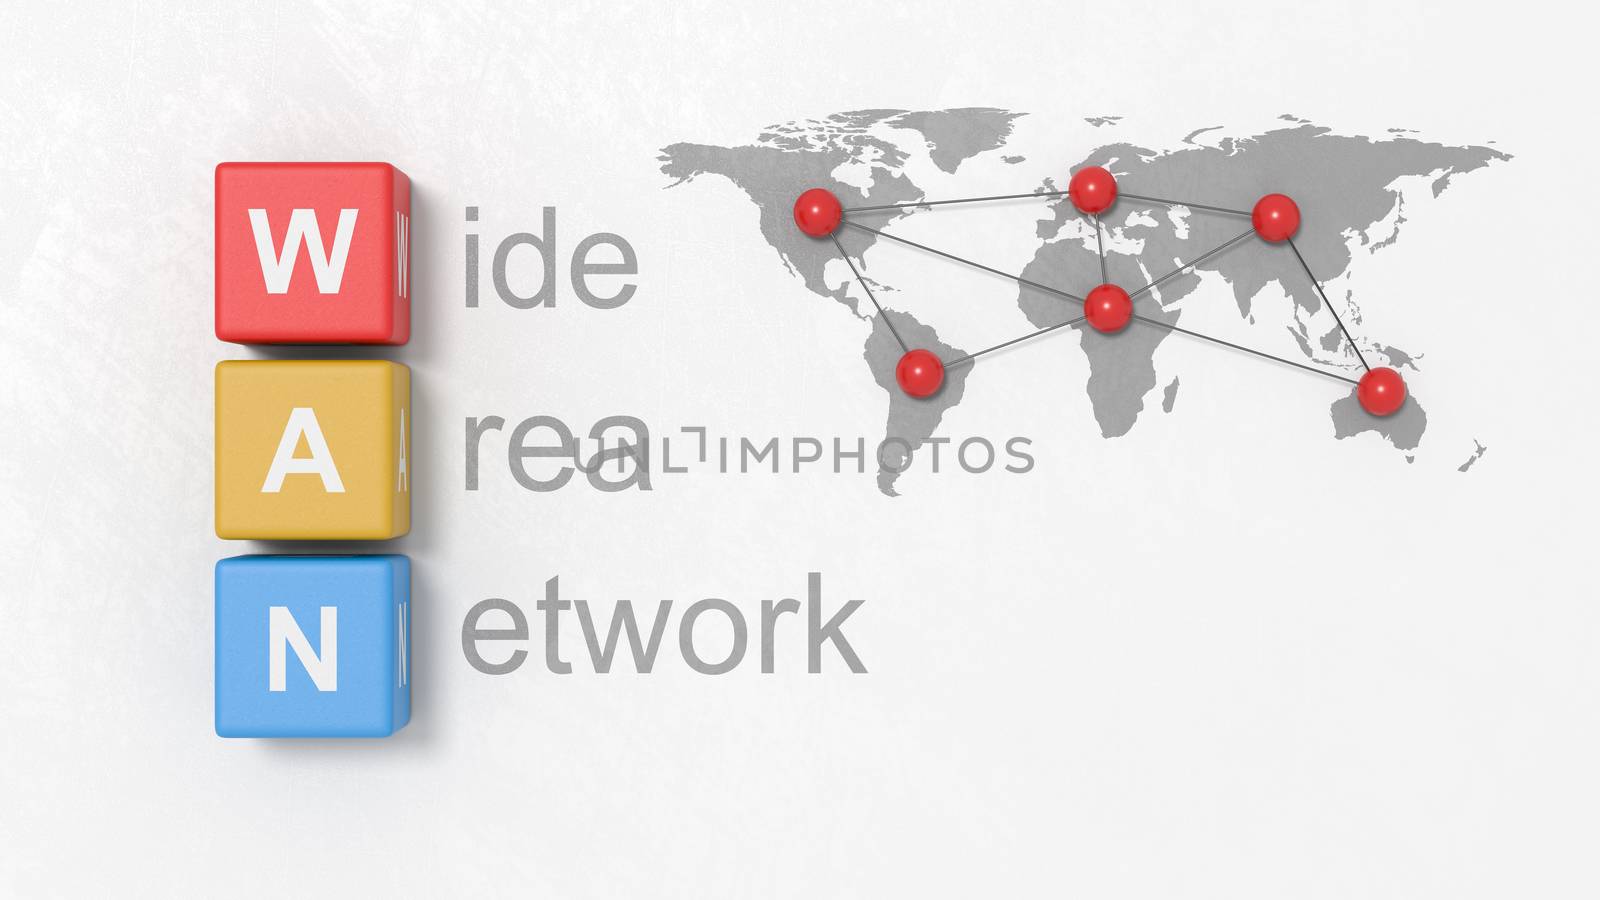 Black Wide Area Network Text, WAN Colorful Cubes and World Map with Red Spots Connected Together on a Light Gray Plastered Background 3D Illustration